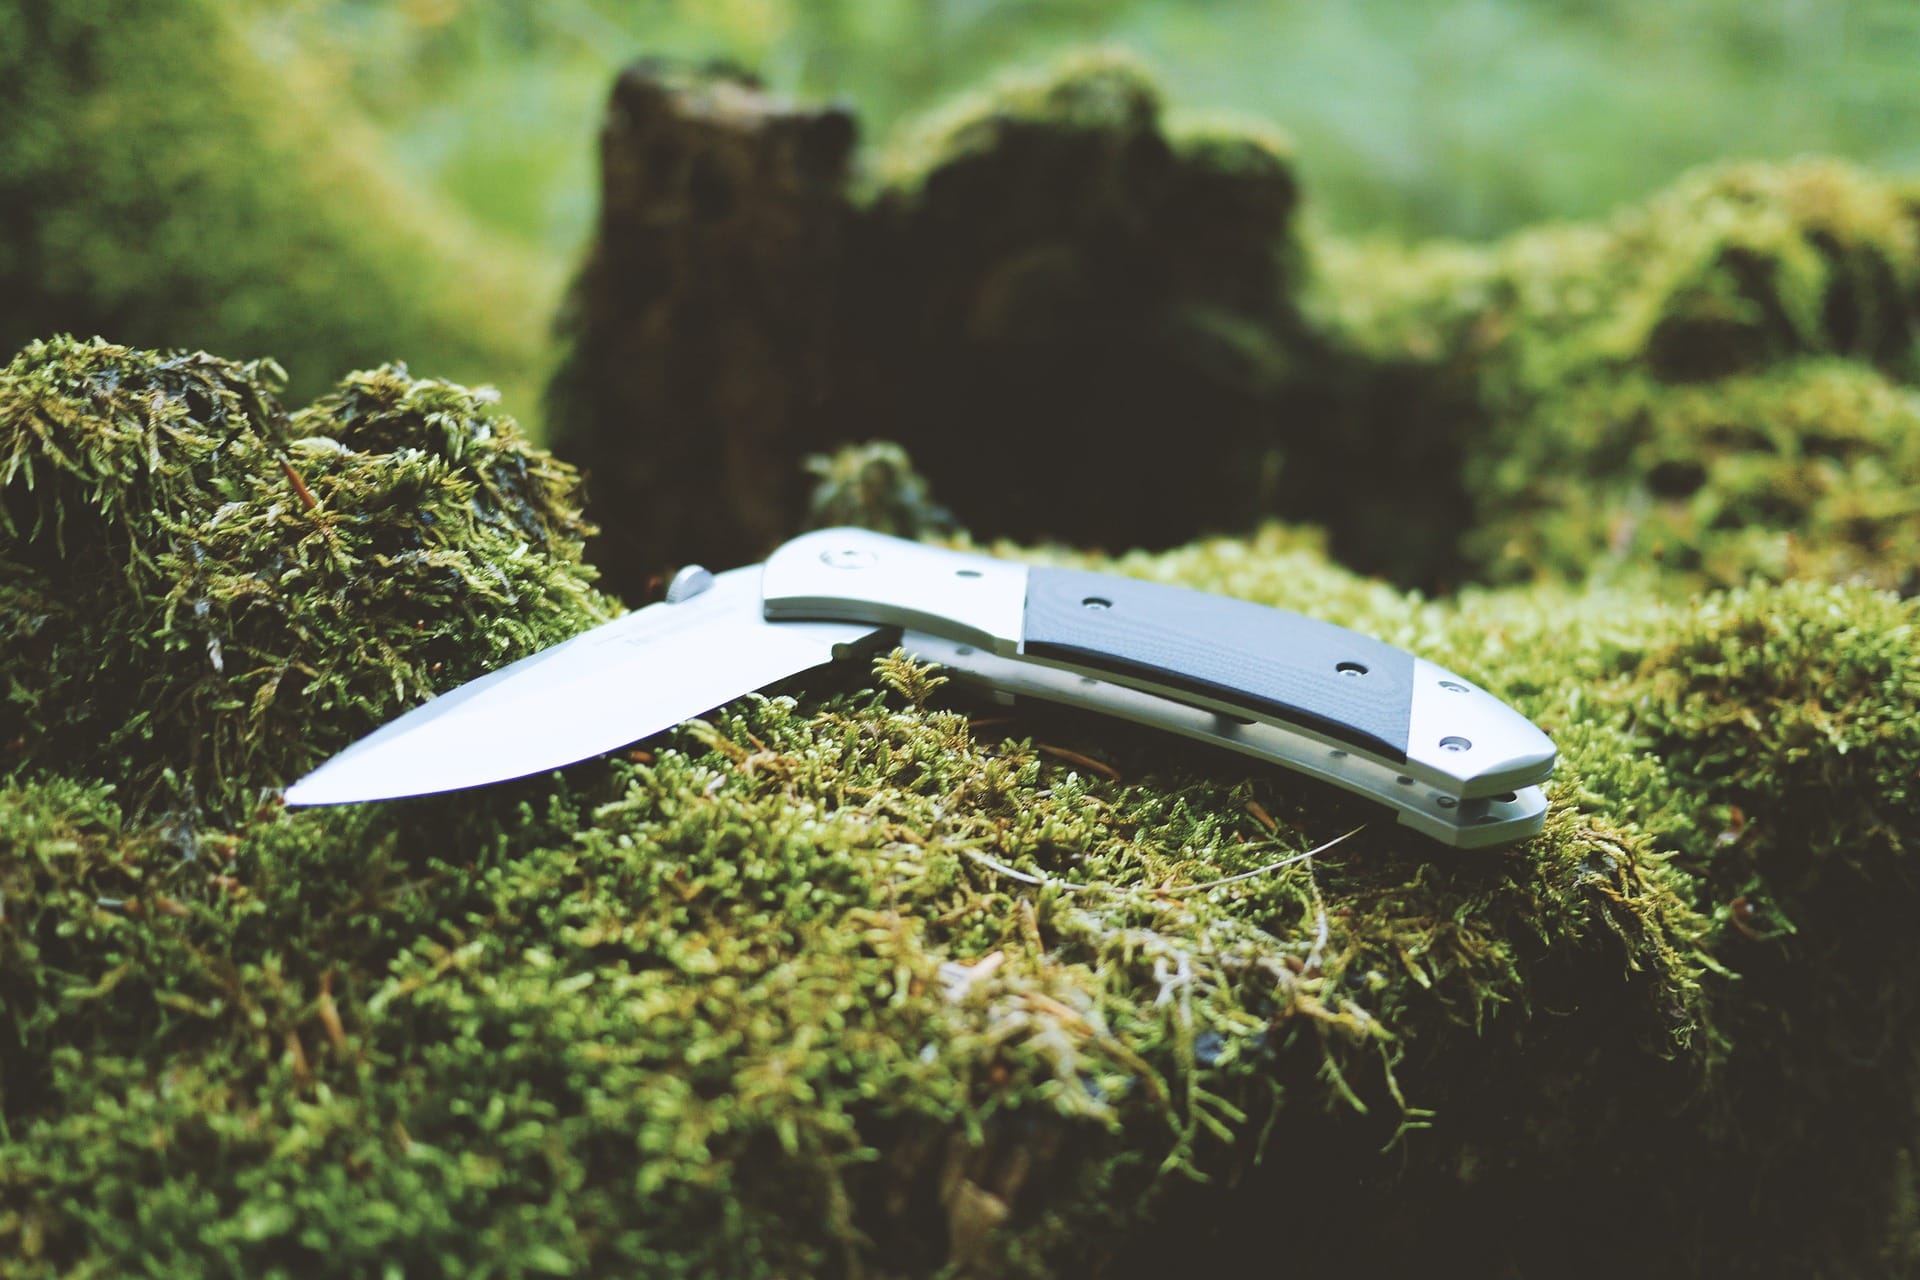 Best camping knife